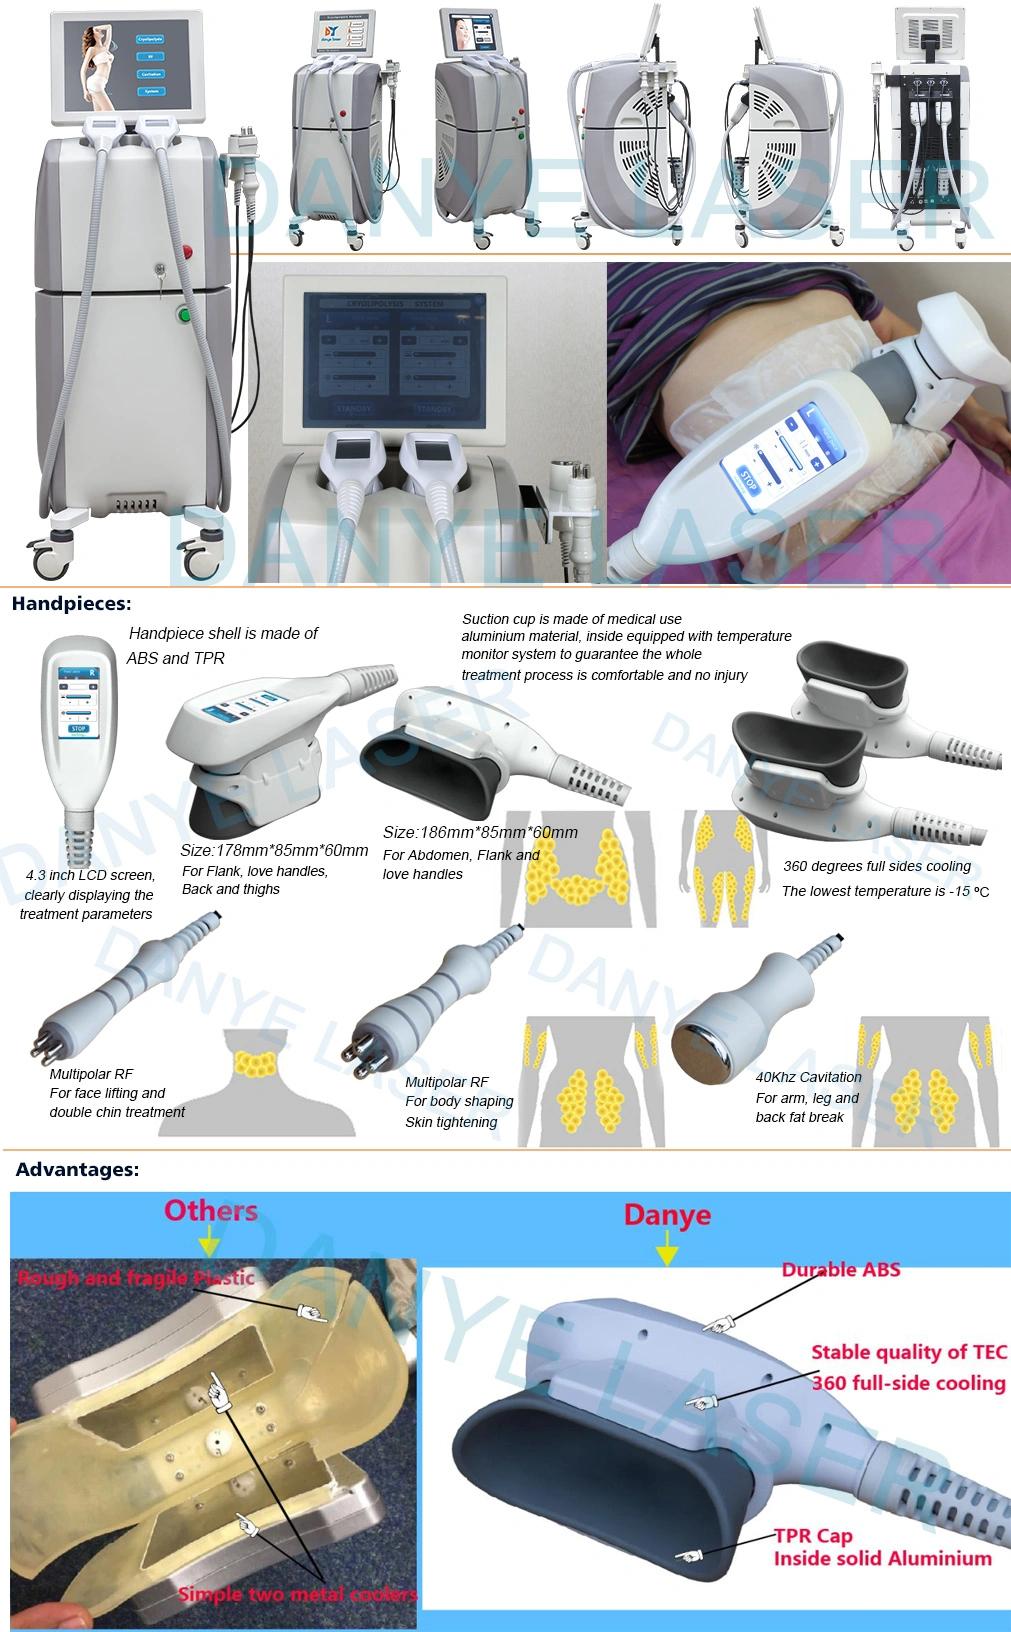 Weight Loss Body Shaping System Fat Freeze Device 40kHz 360 Angel Cryo and Cavitation